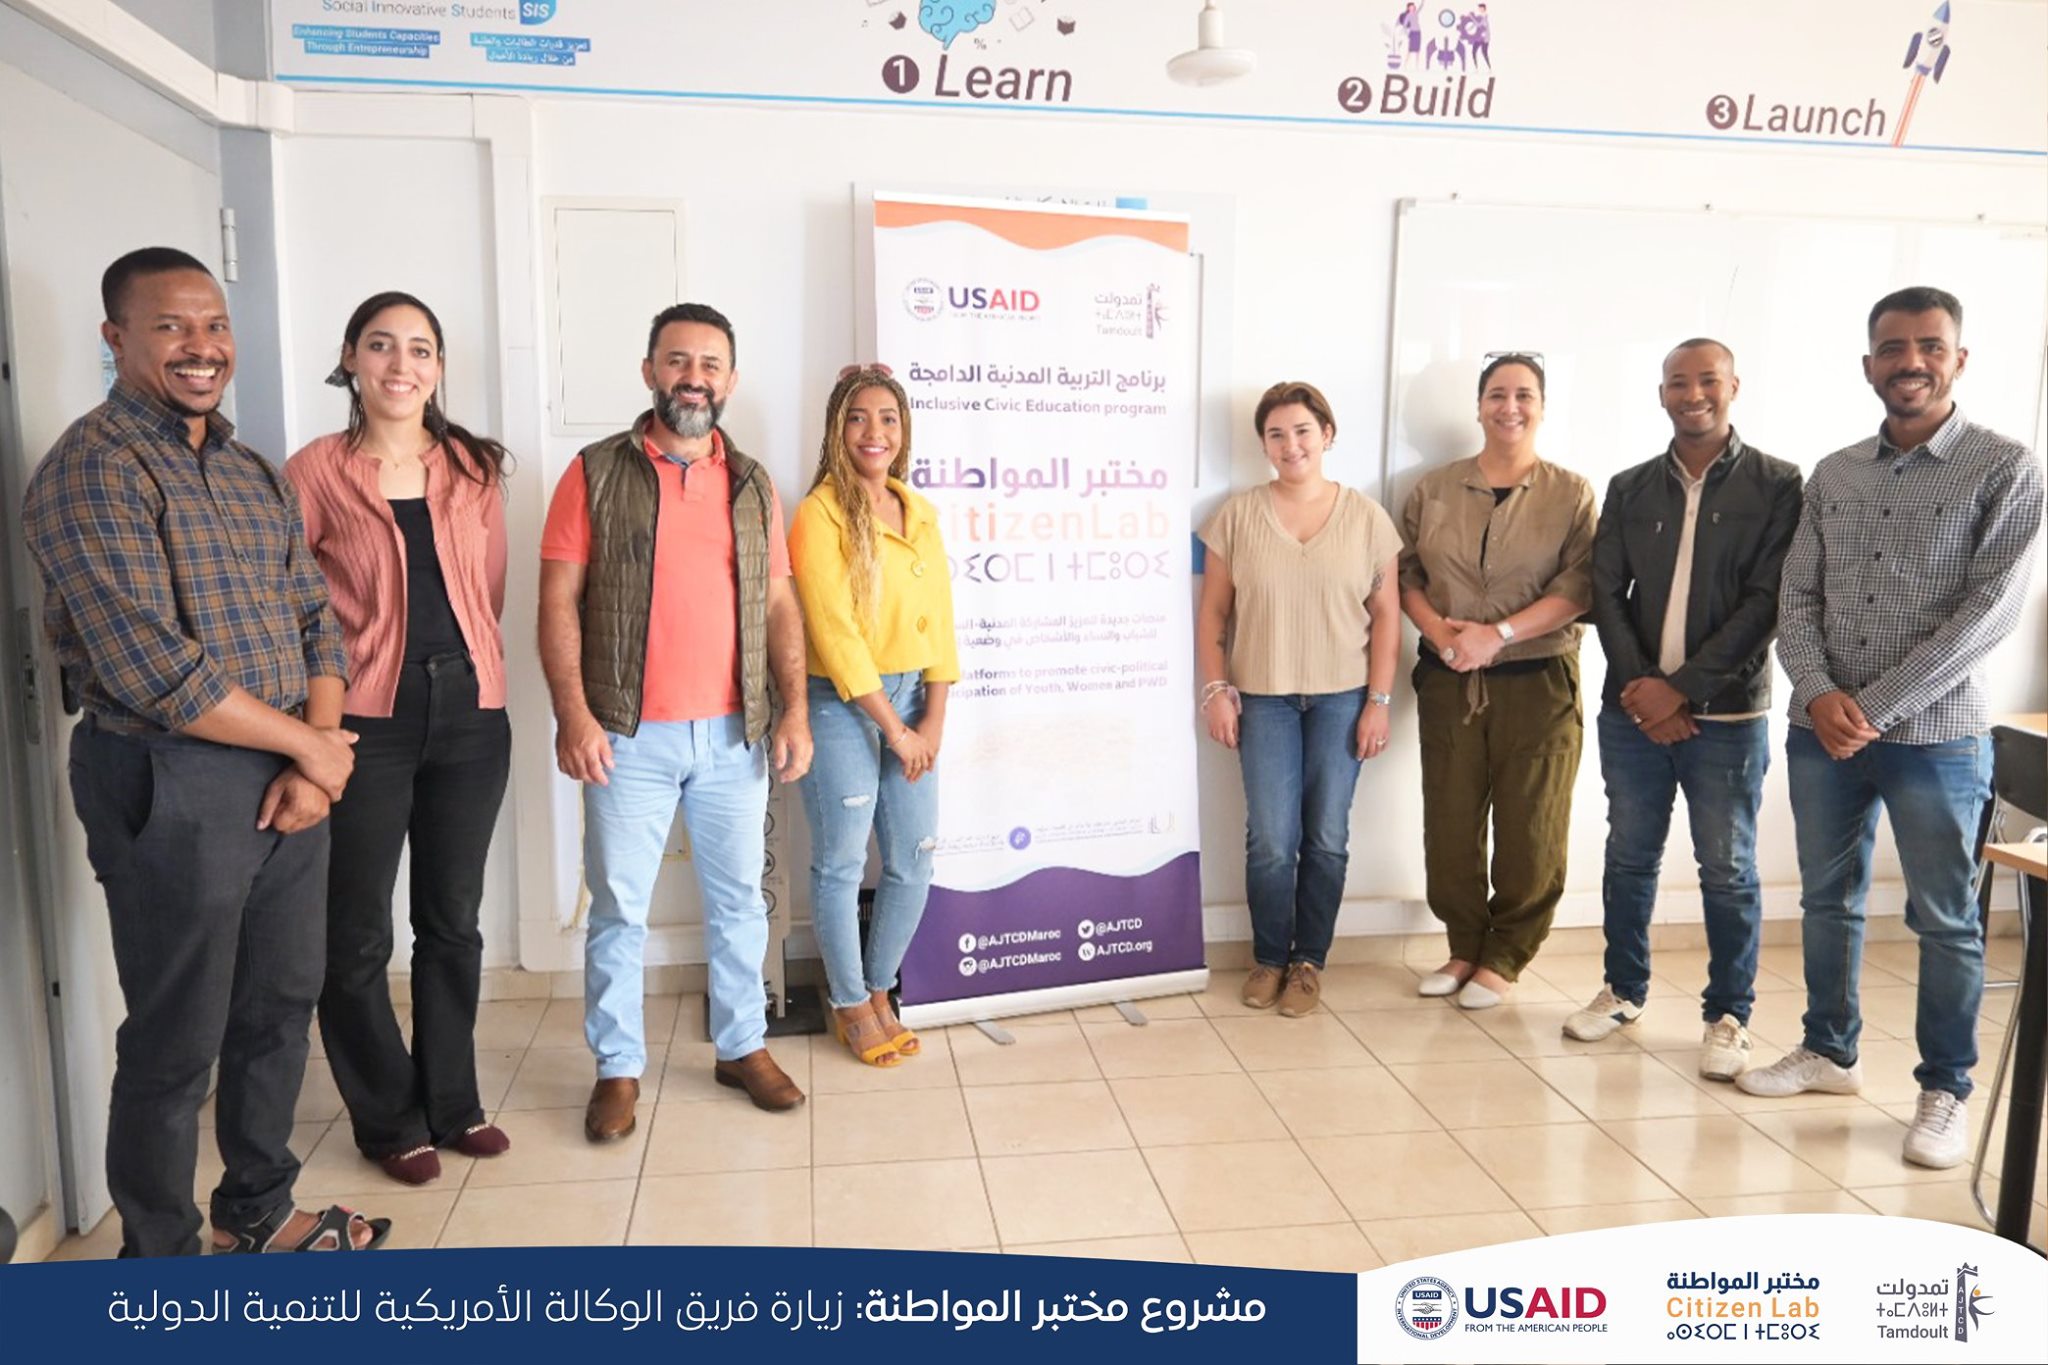 A team visit from the USAID